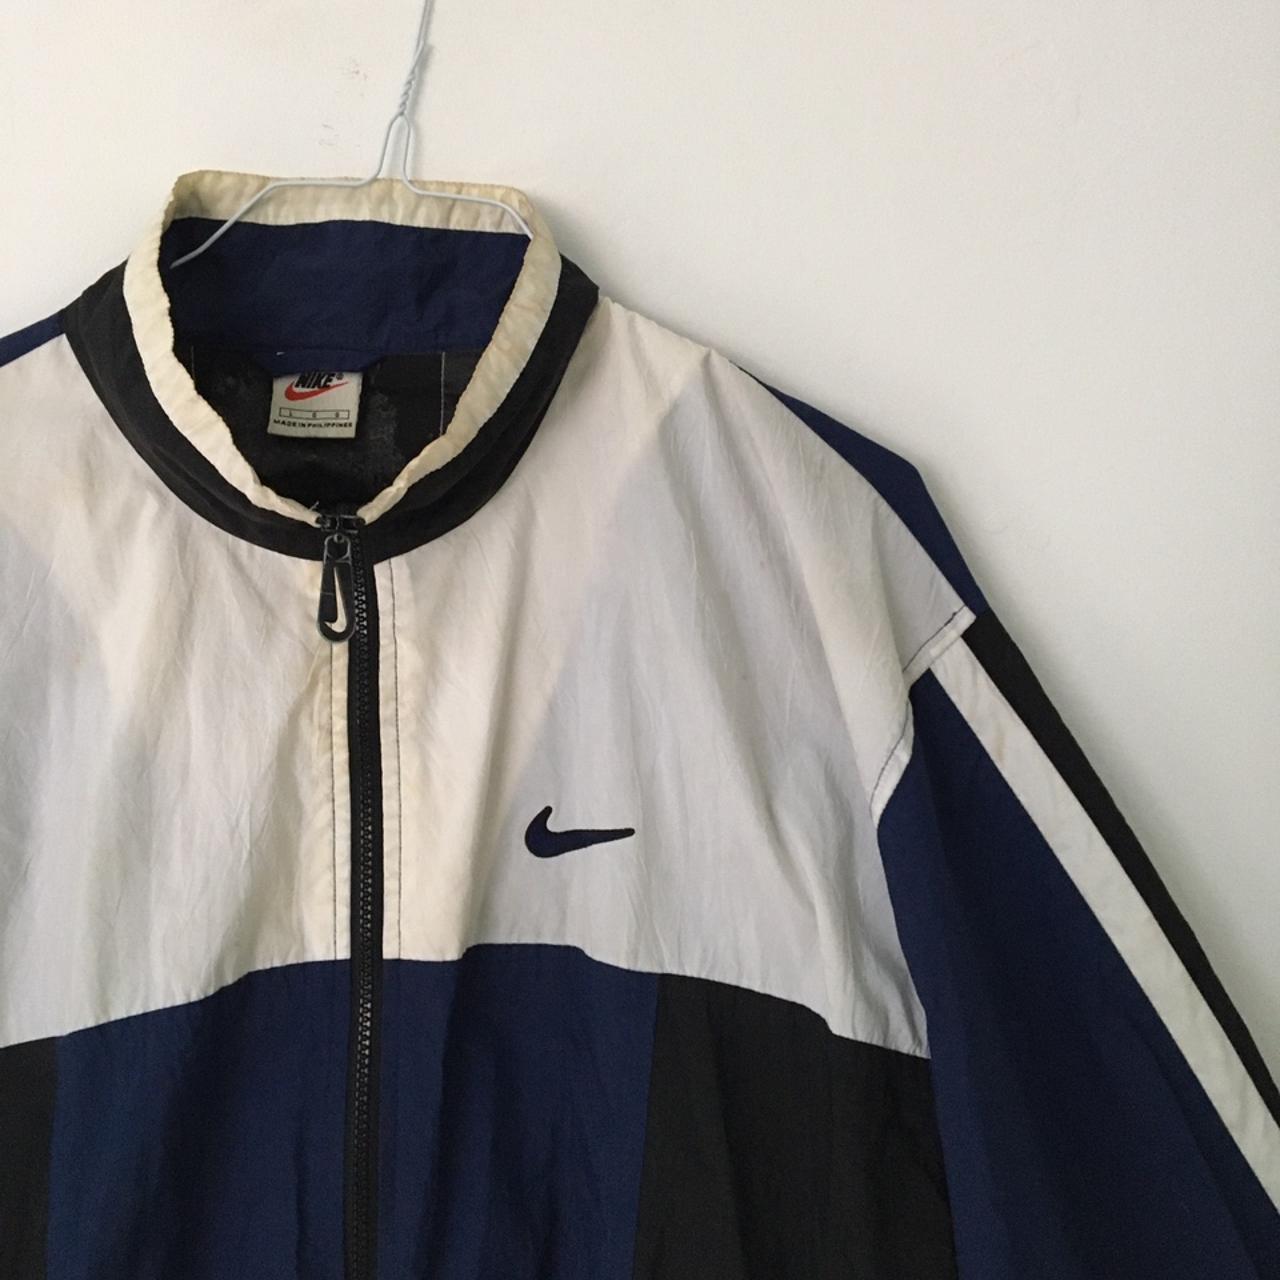 Vintage Nike shell jacket in navy, white and black.... - Depop